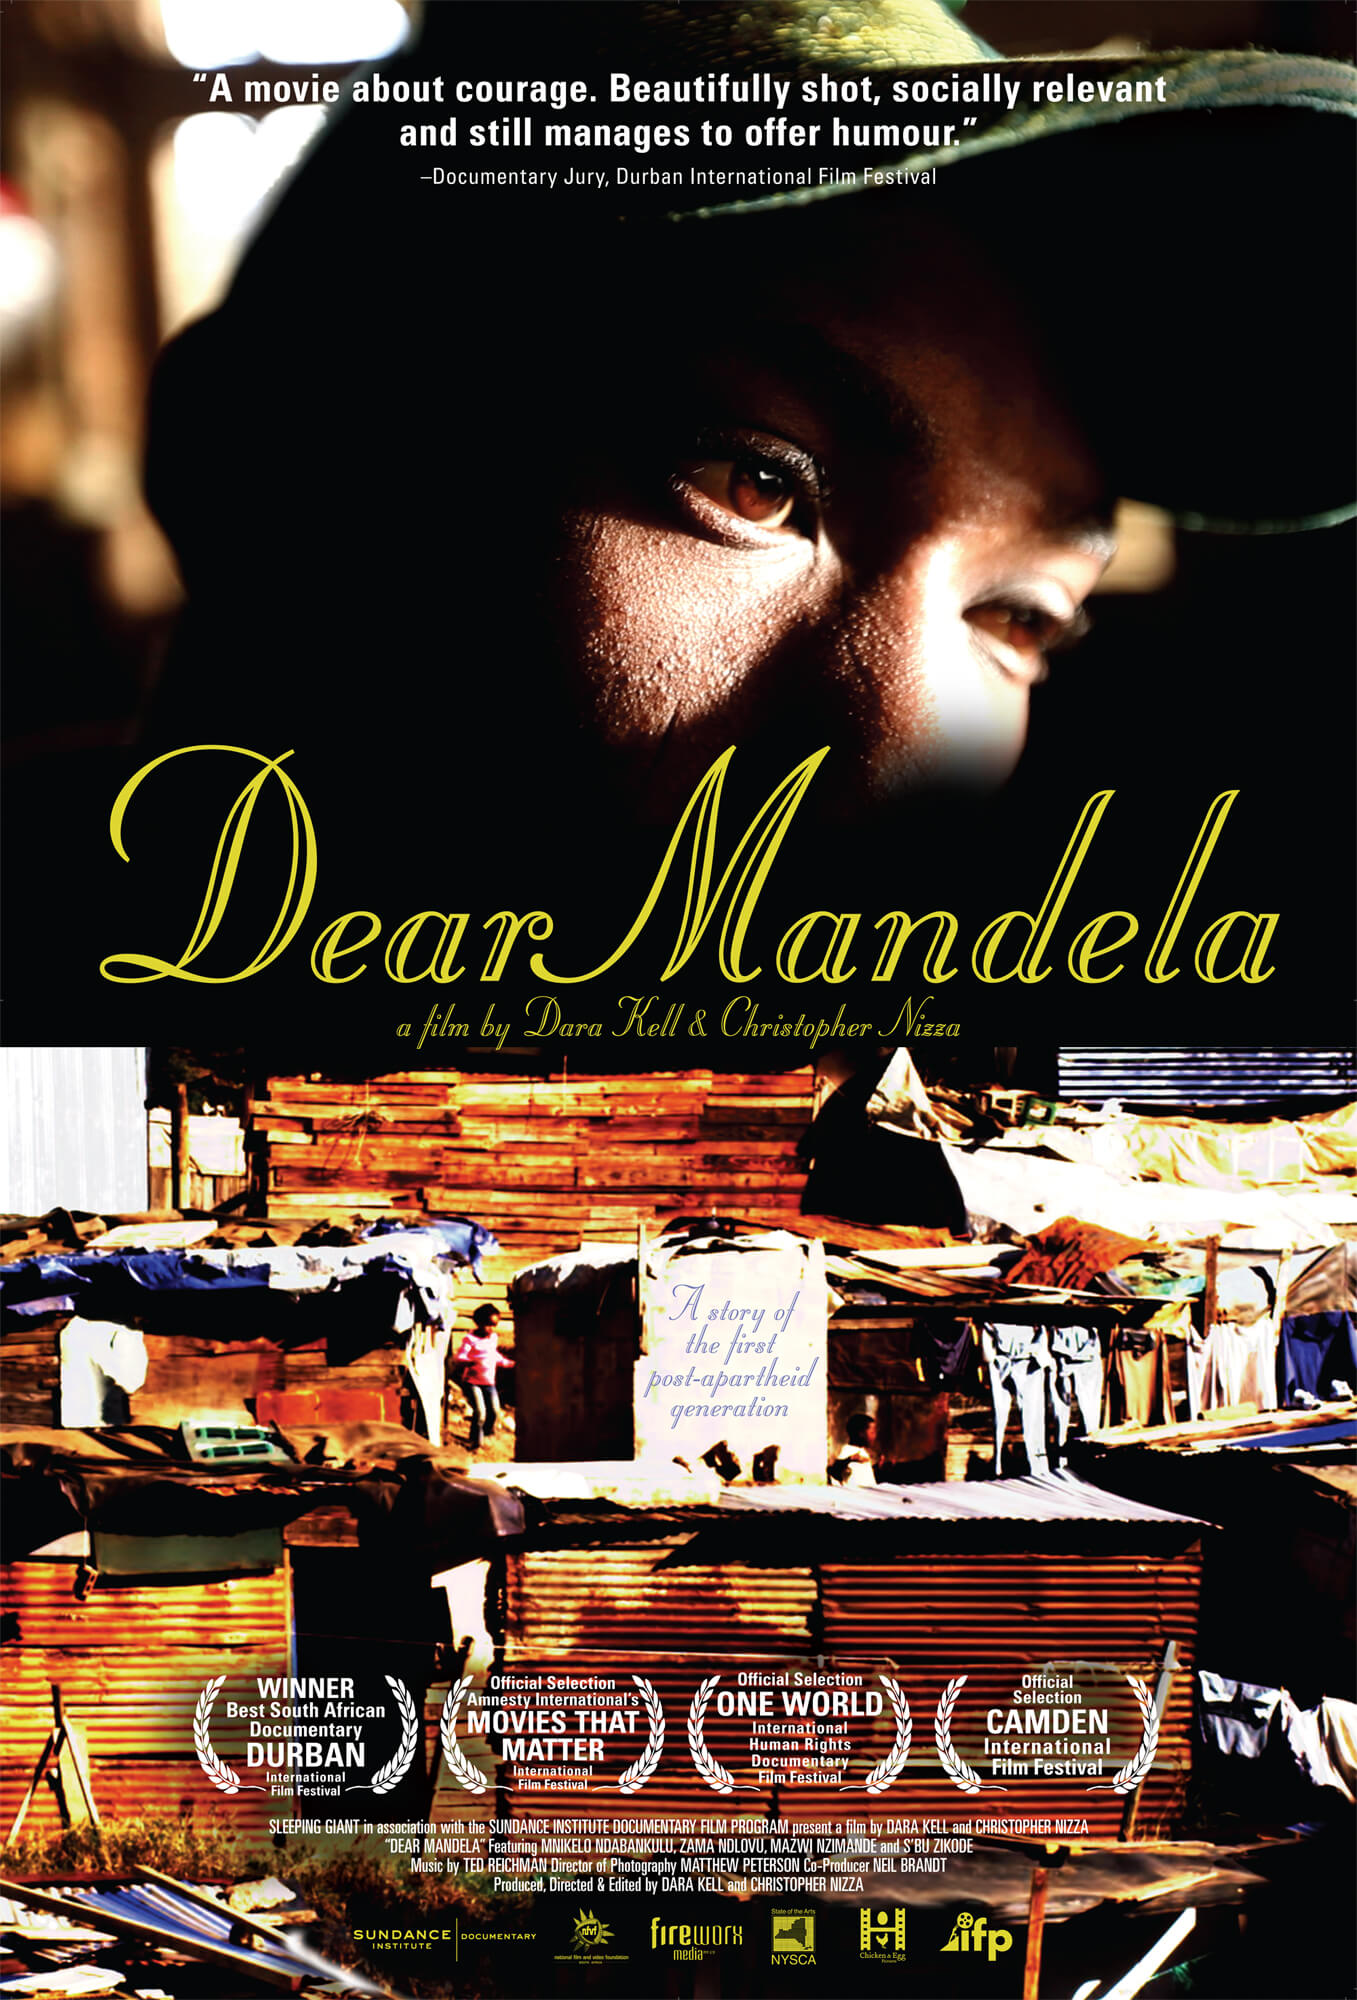 Graphic poster of the film Dear Mandela by Dara Kell & Christopher Nizza. Two photographs are placed on the poster, the first one is a close-up shot of the eyes of a person, and the second one is of a poverty-stricken neighborhood in South Africa.